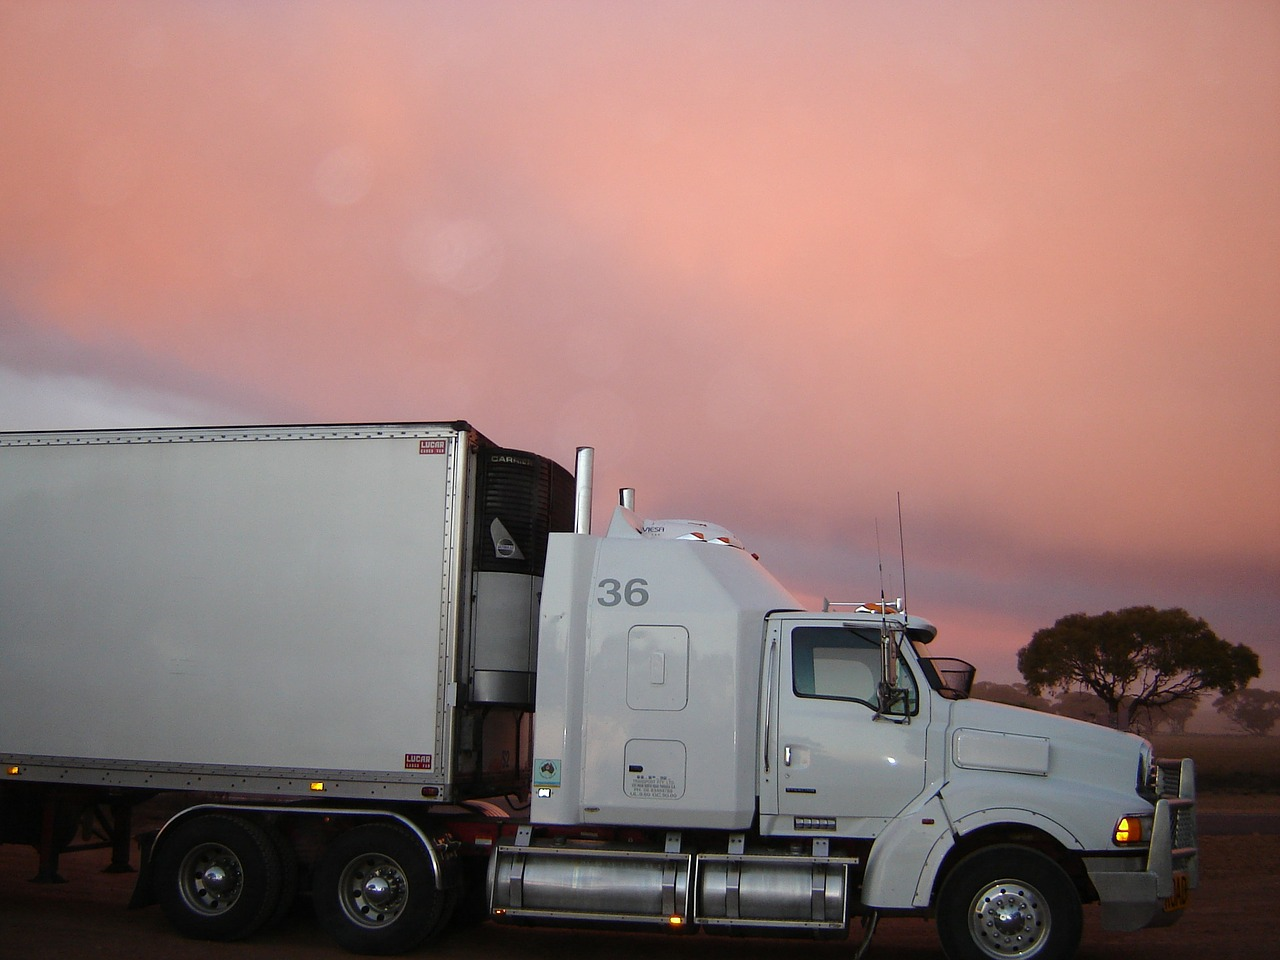 Profile of freight truck at sunset